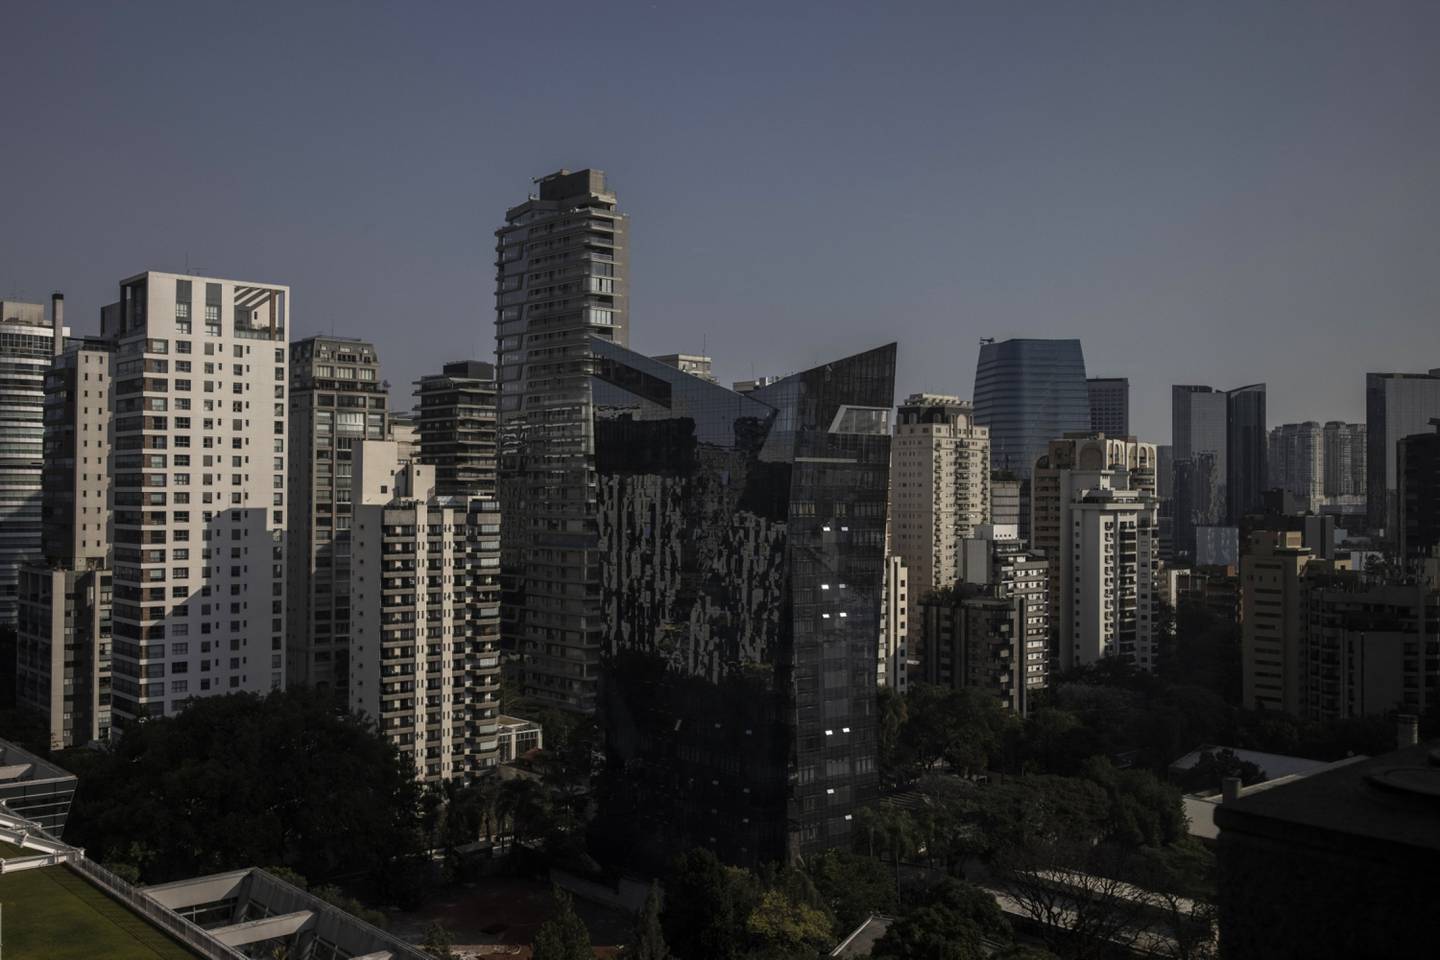 The Nova Faria Lima region, in São Paulo, has the highest average asking price for rents in the capital: 161.62 reais ($30.30) per square meter